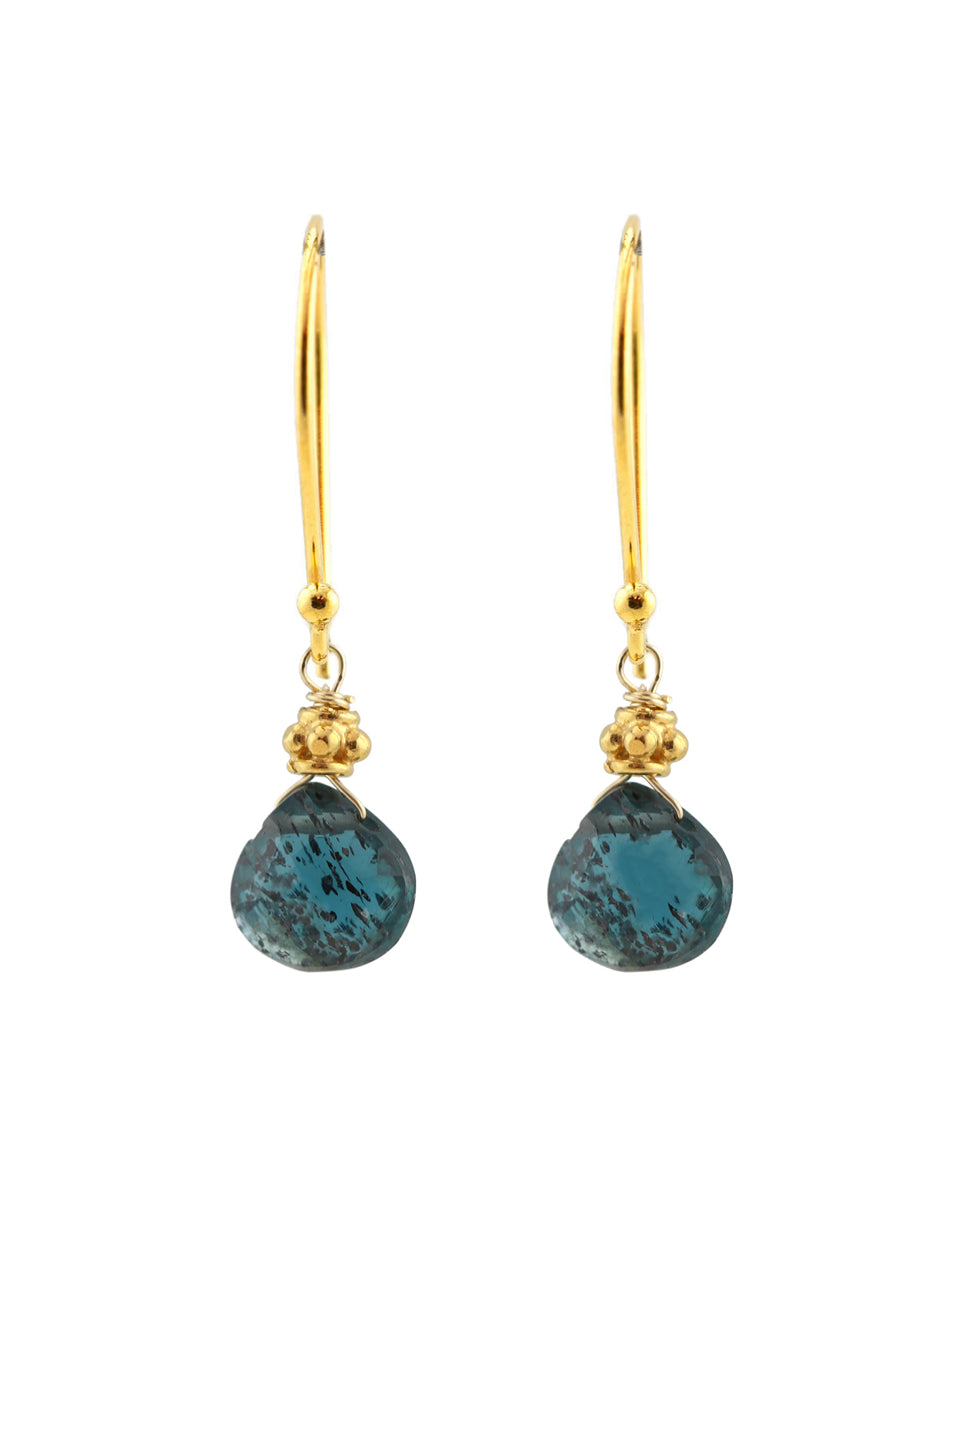 Tiny Gold Earrings, Indigo-Earrings-Vixen Collection, Day Spa and Women's Boutique Located in Seattle, Washington